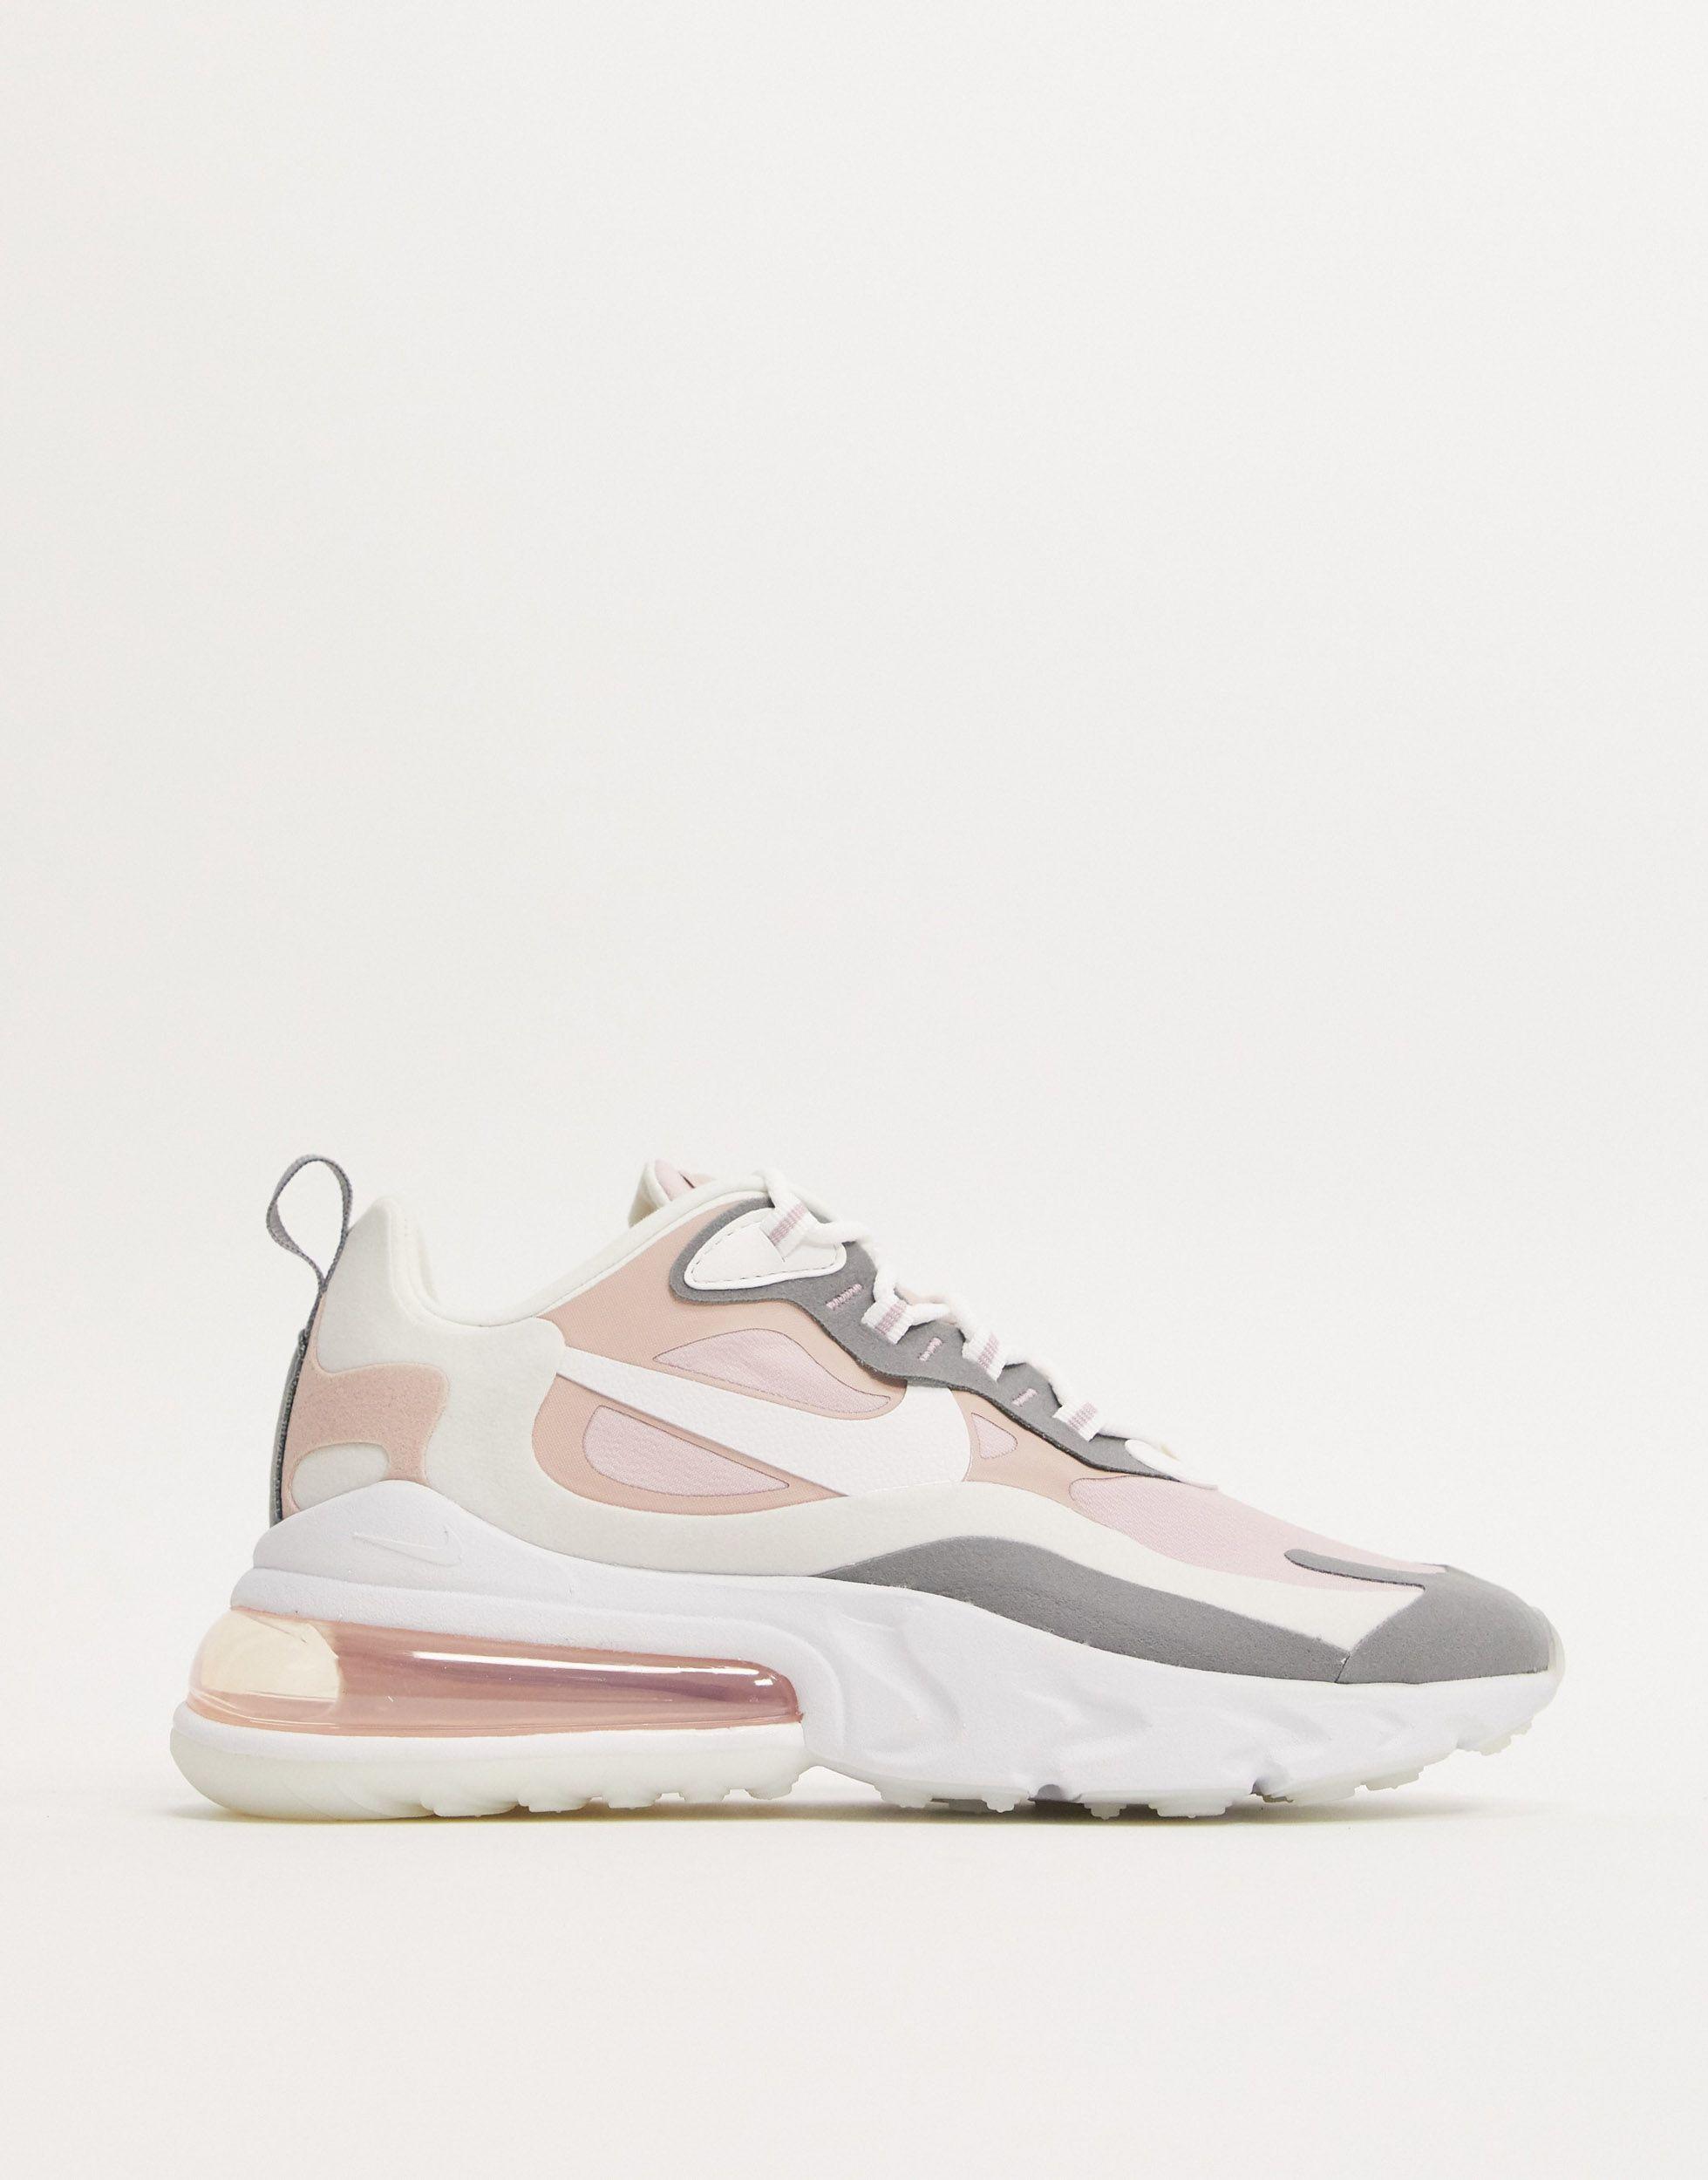 Nike Air Max 270 React Trainers in Gray